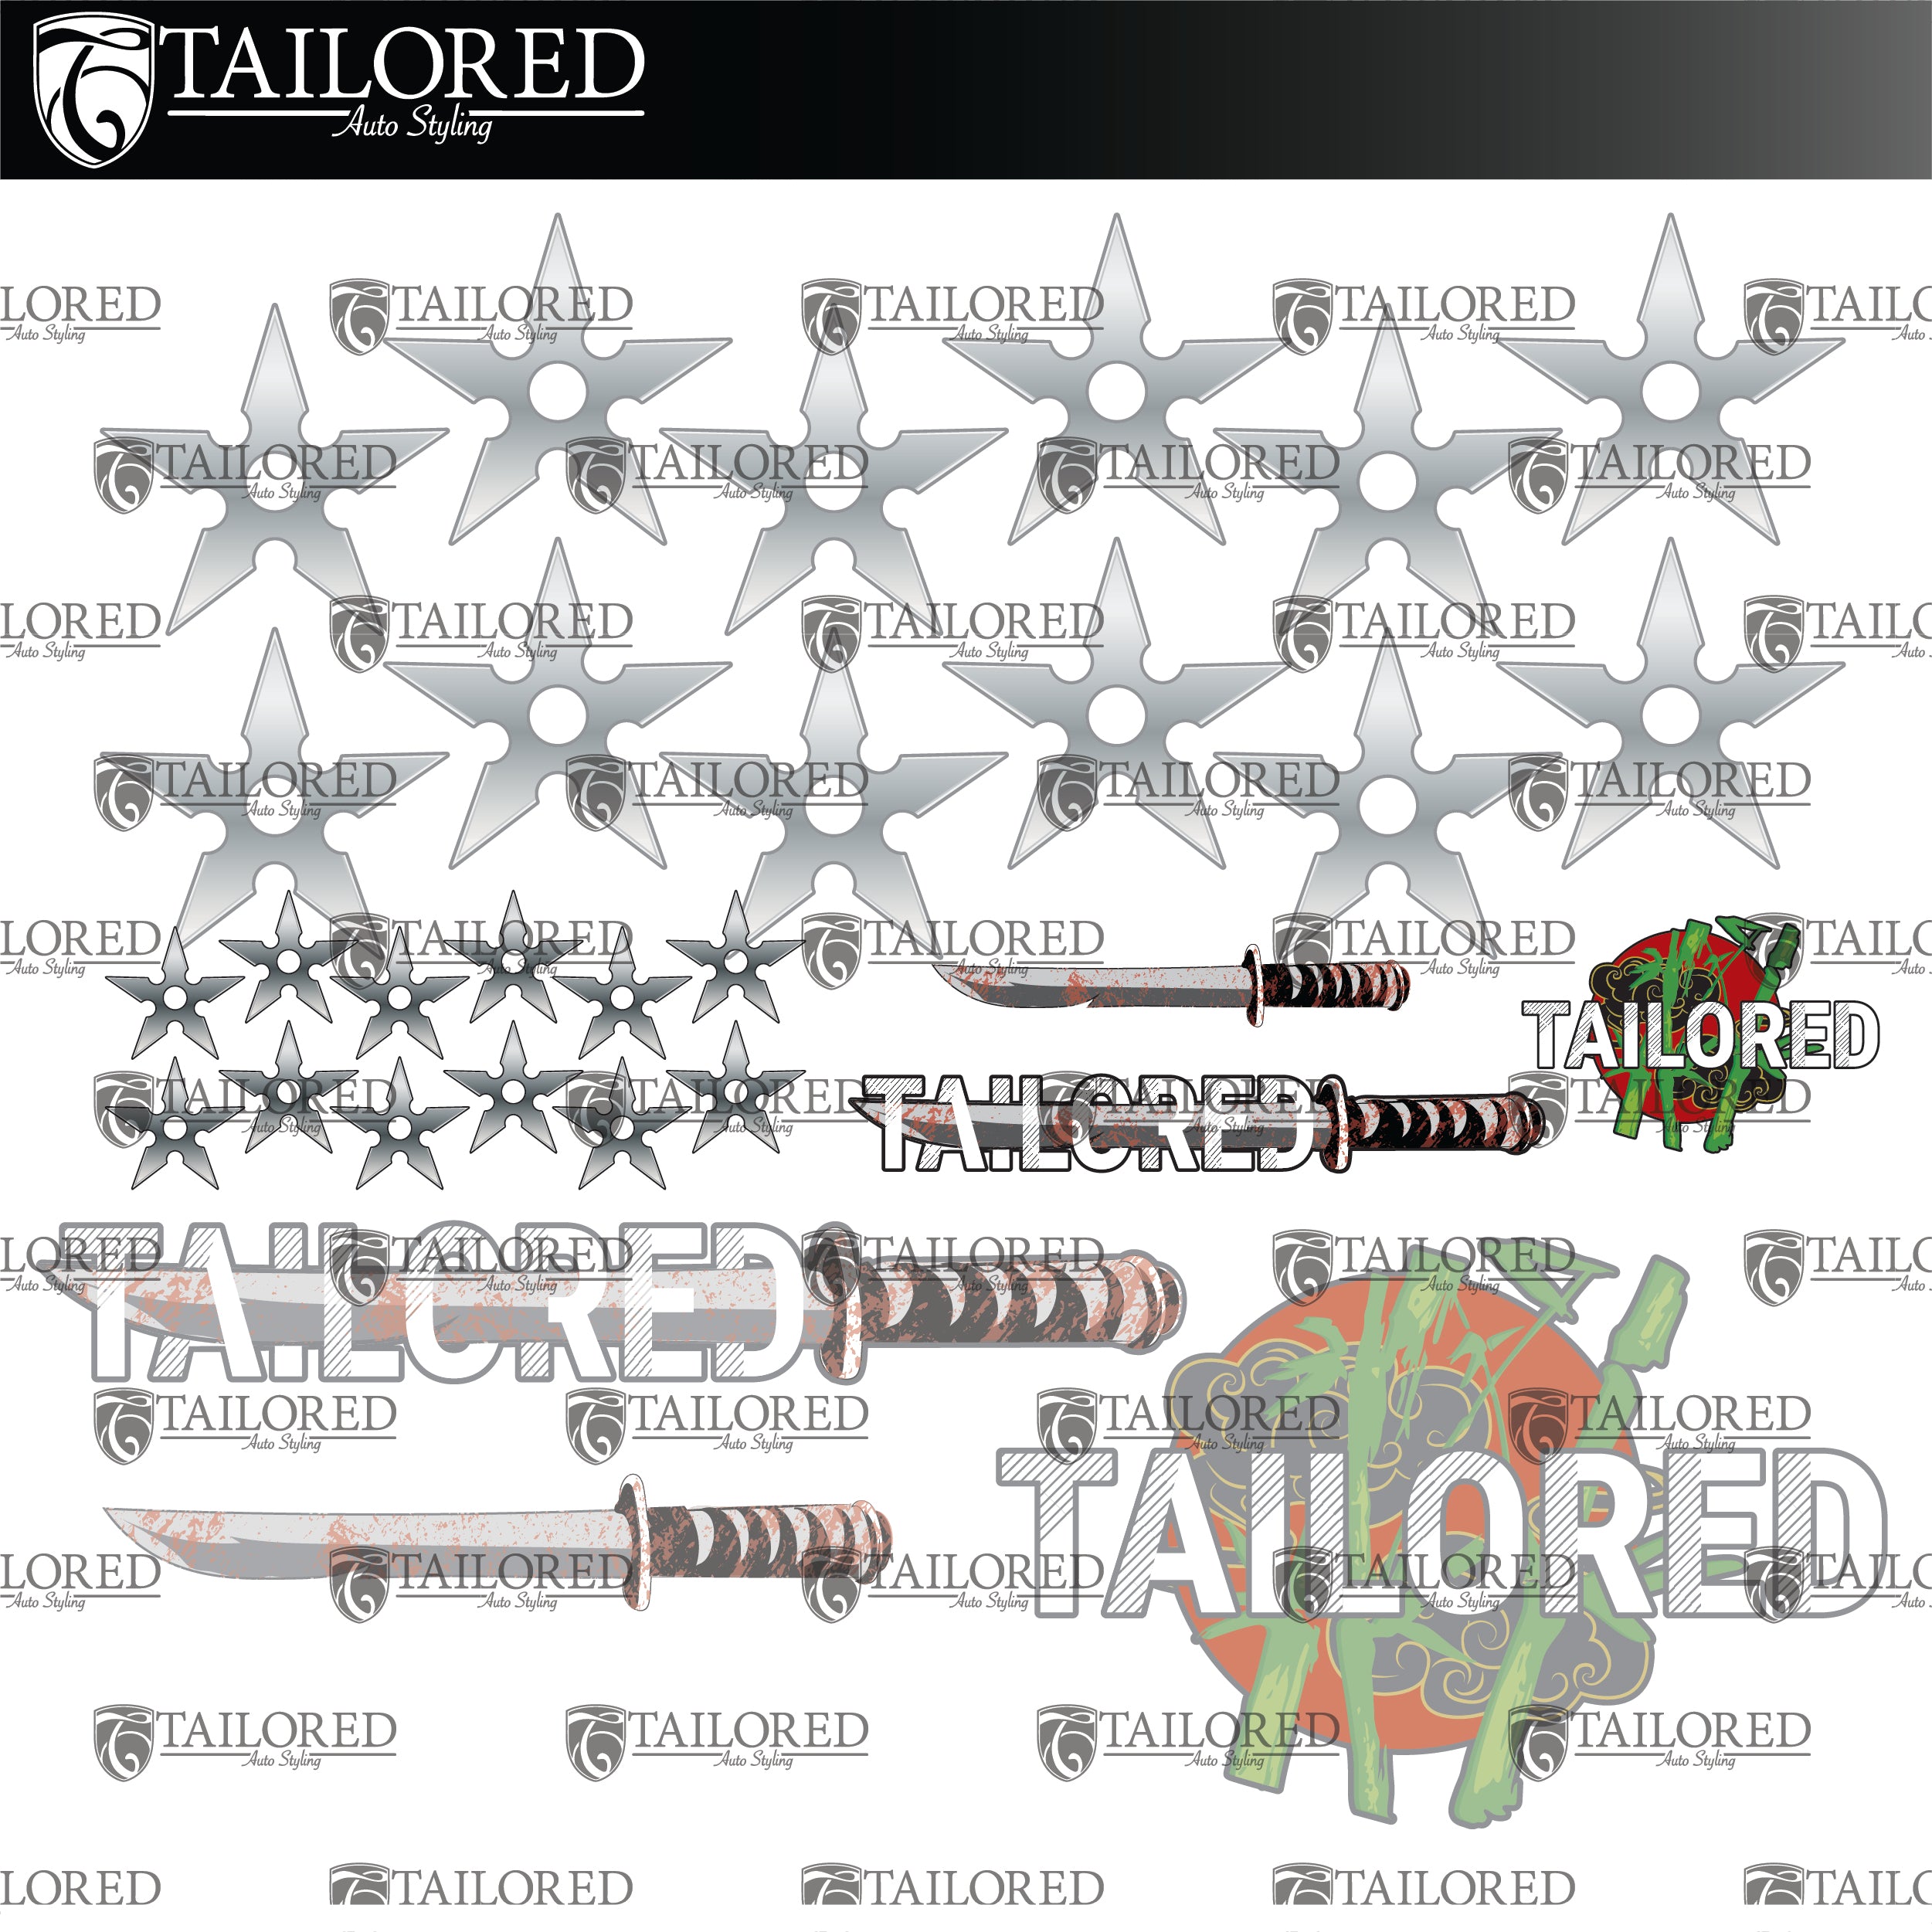 White Tailored Bamboo V.2 Window Banner + Sticker Pack - Universal Fit